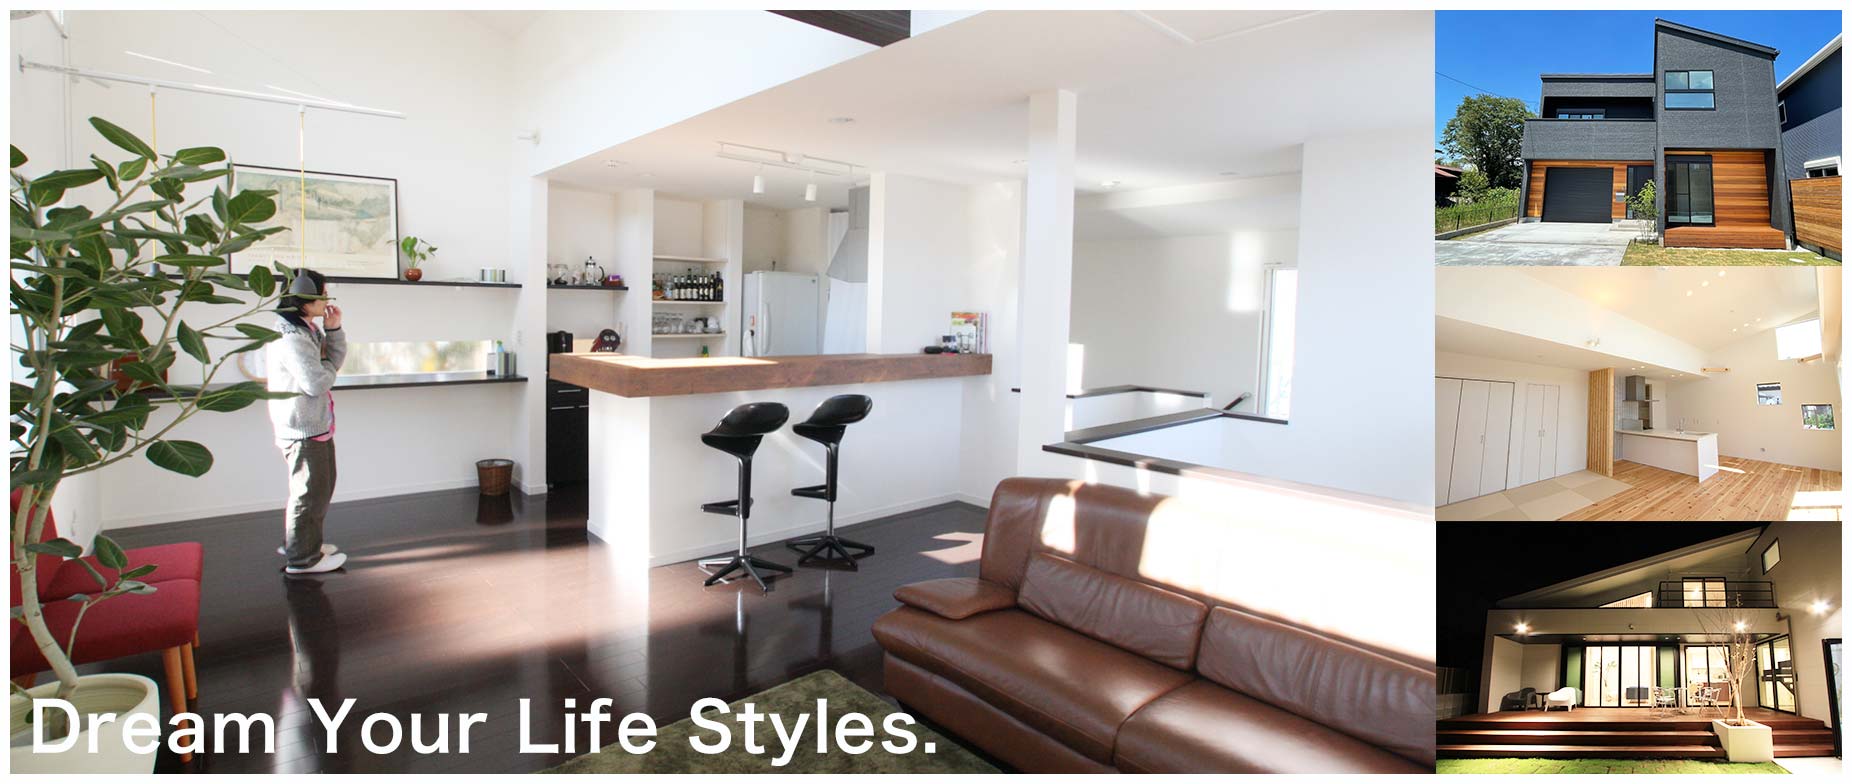 Dream Your Life Styles